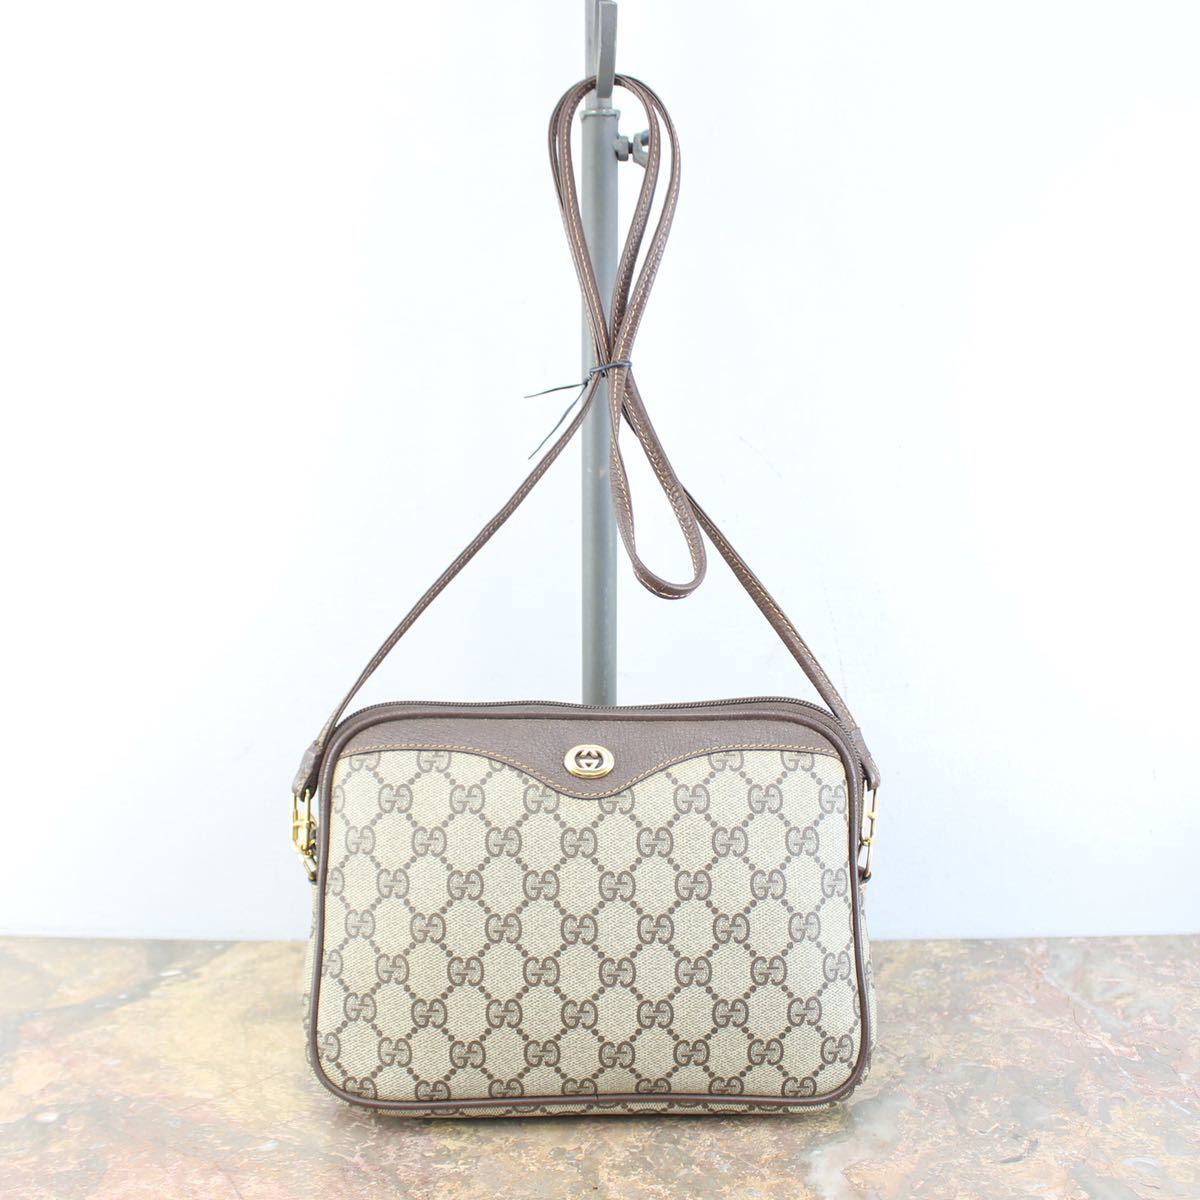 OLD GUCCI GG PATTERNED SHOULDER BAG MADE IN ITALY/オールドグッチGG